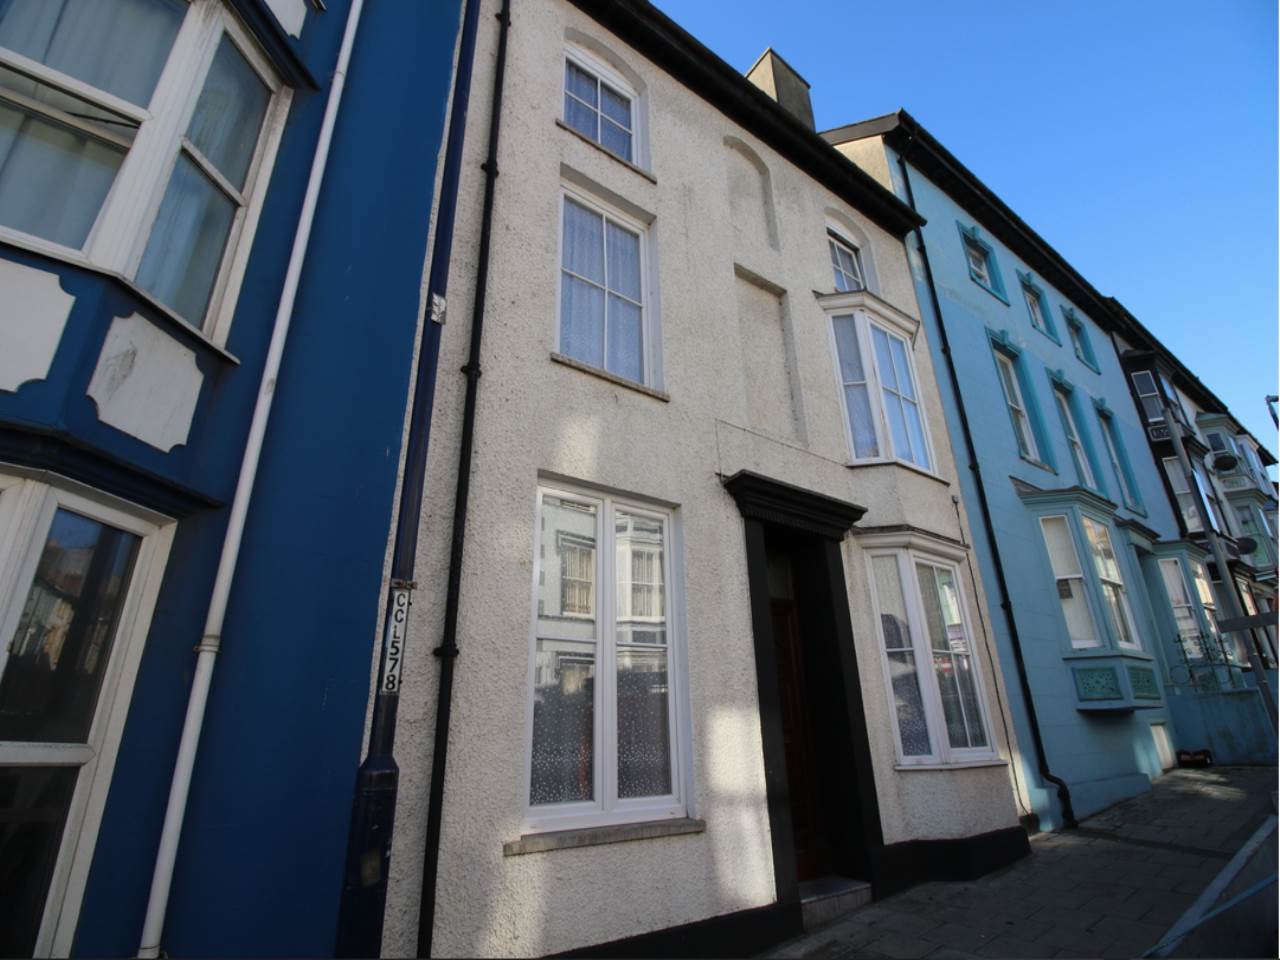 9 bed house for sale in Bridge Street, Aberystwyth, SY23